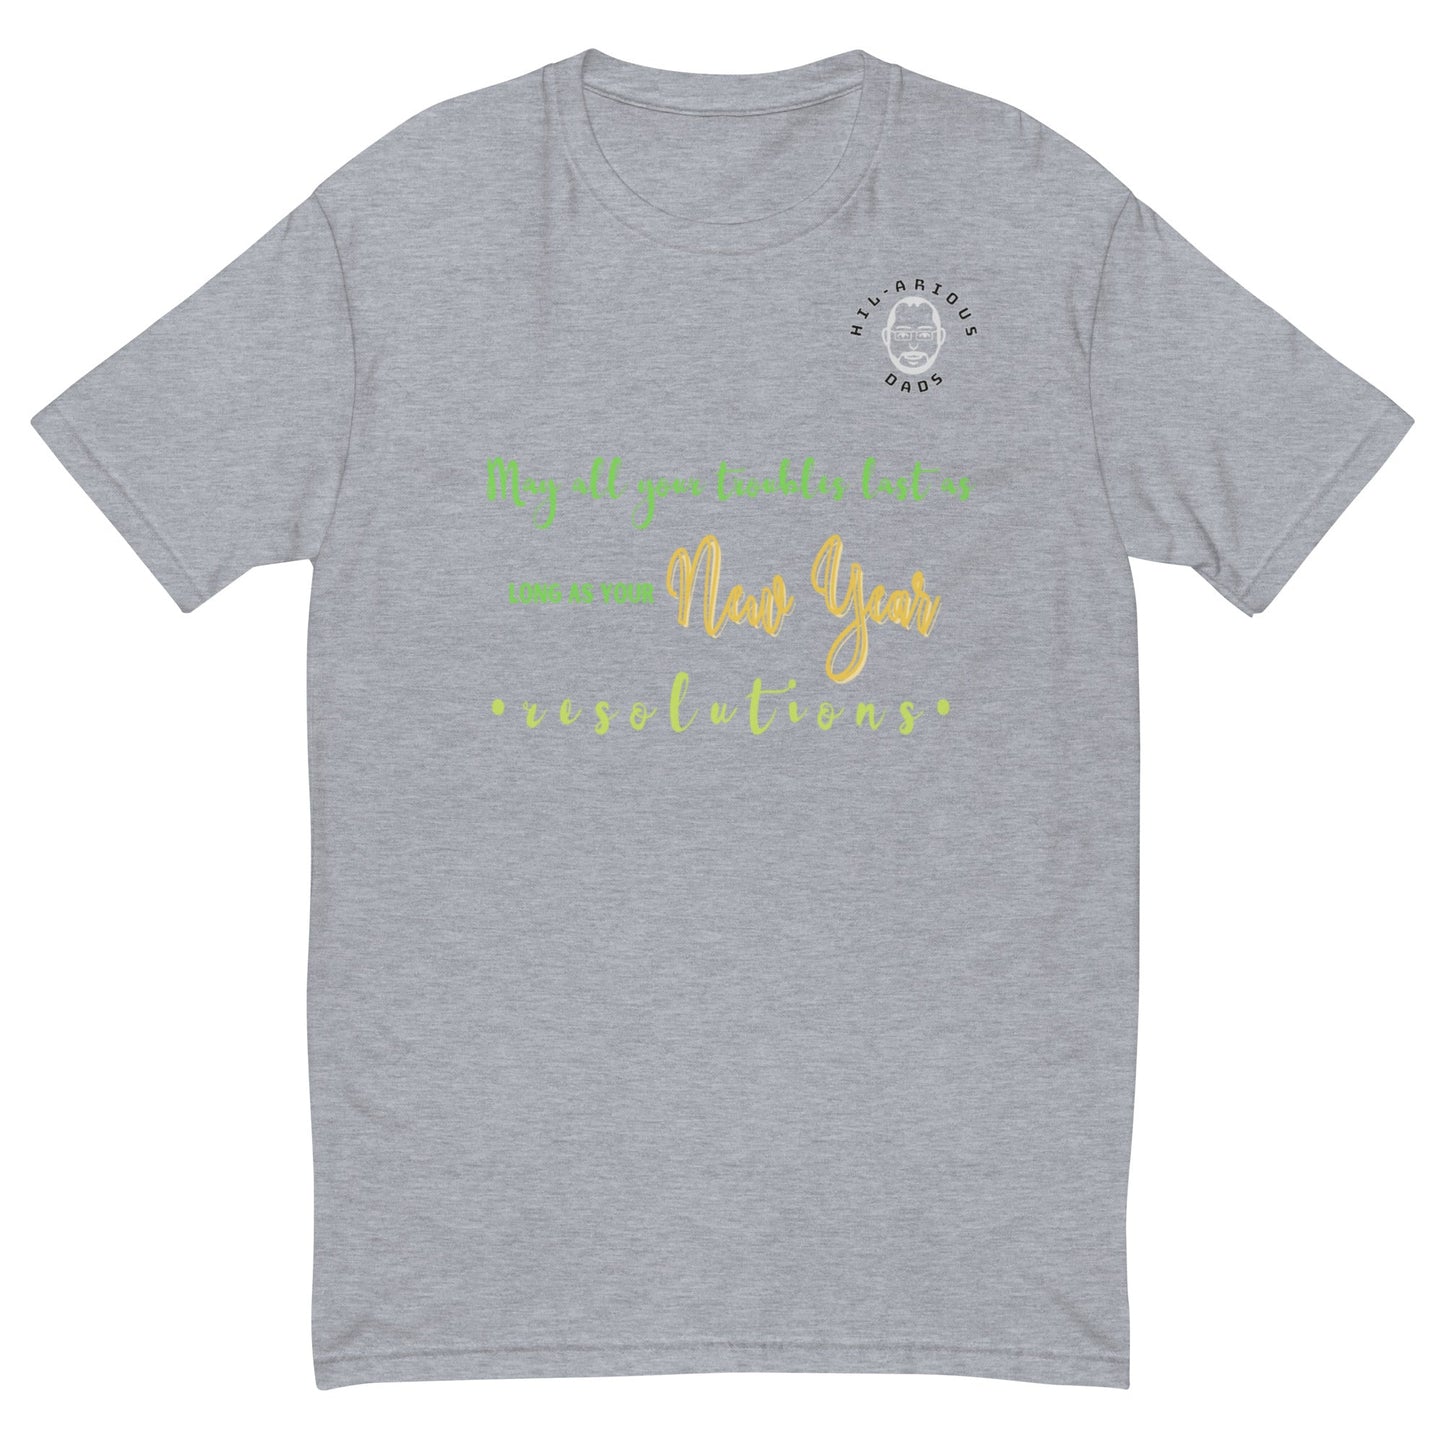 New Year Resolutions-T-shirt - Hil-arious Dads